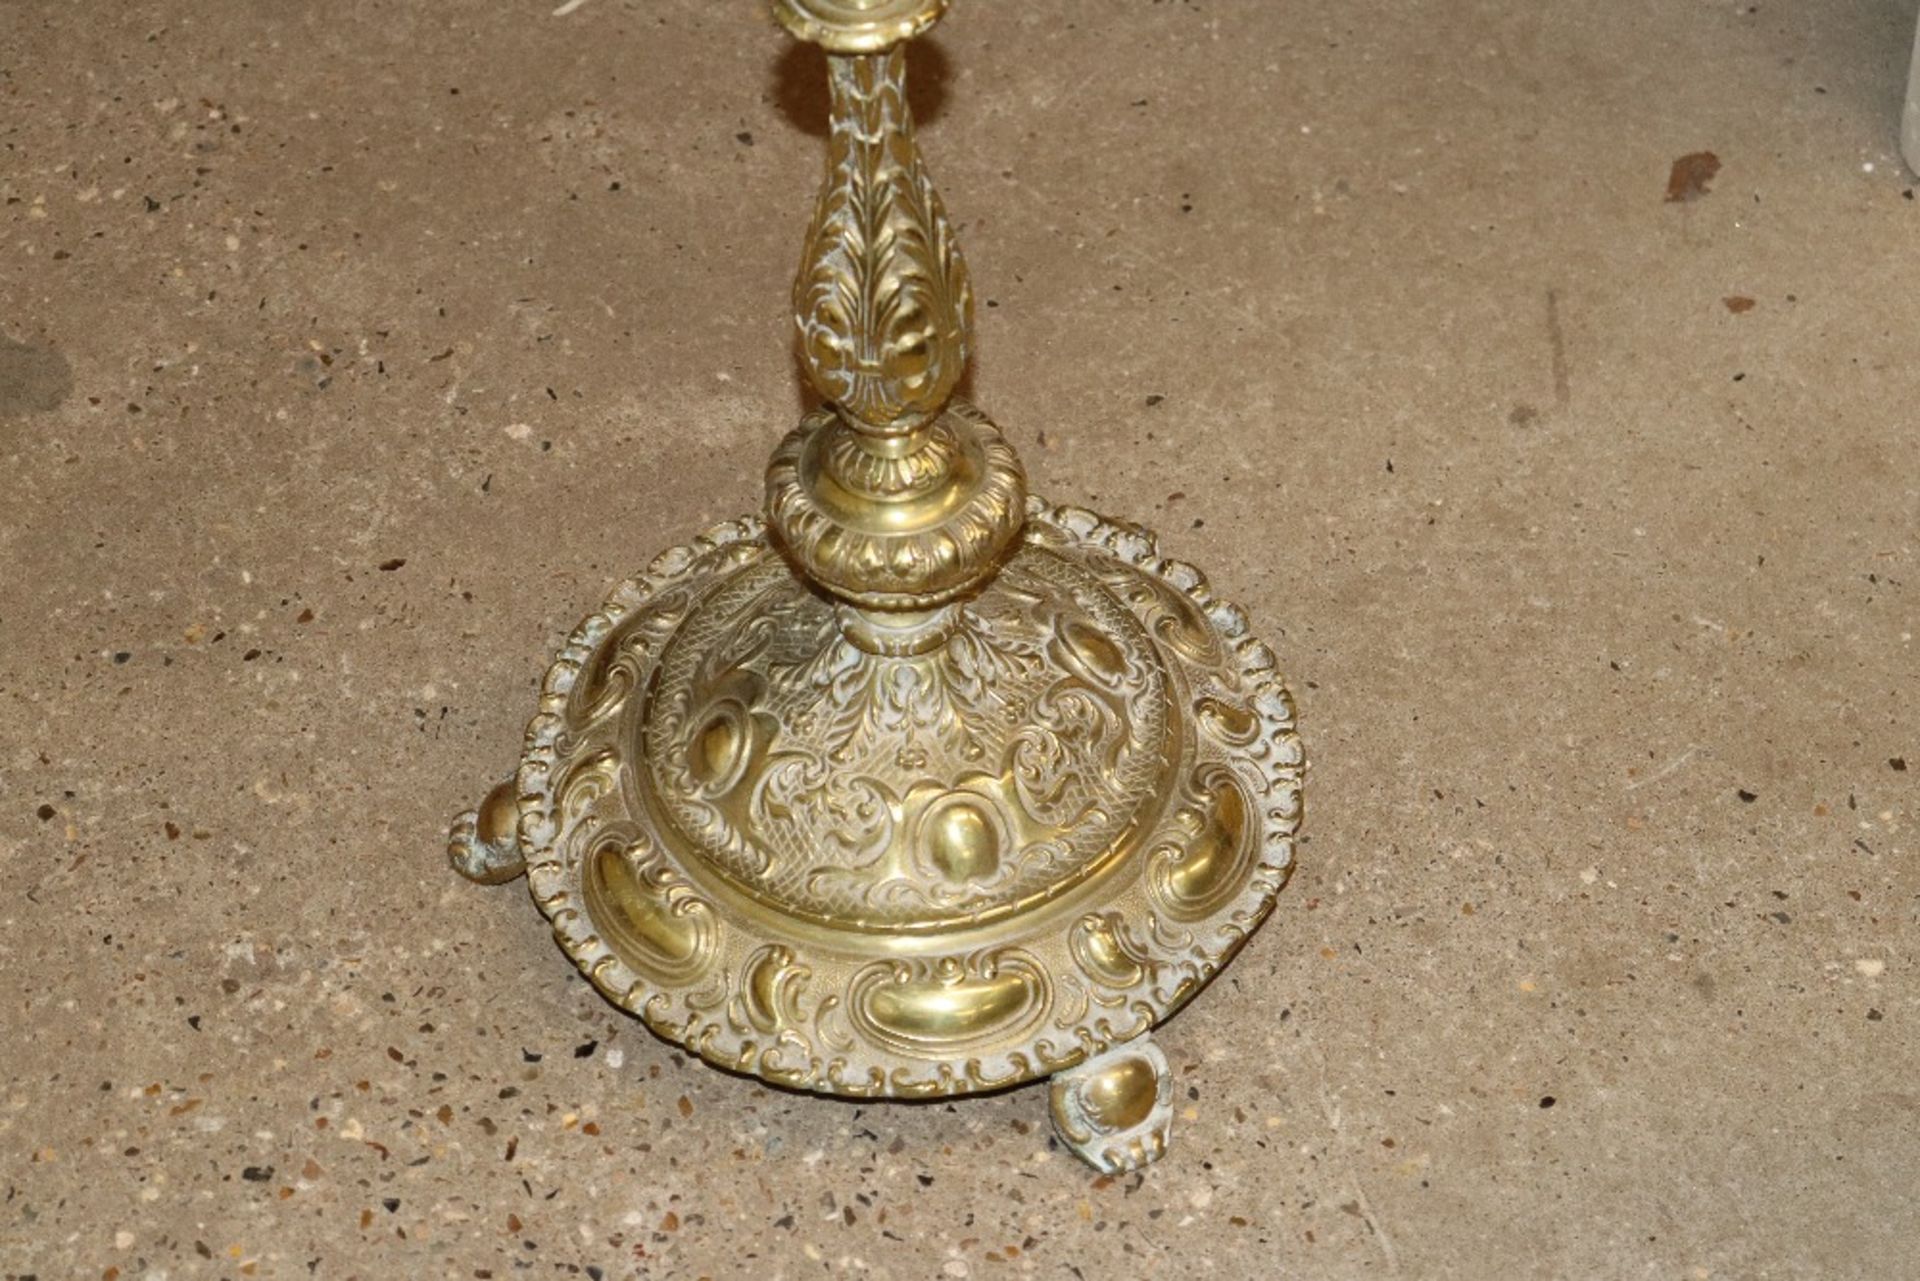 An ornate brass standard lamp in the form of a lar - Image 2 of 4